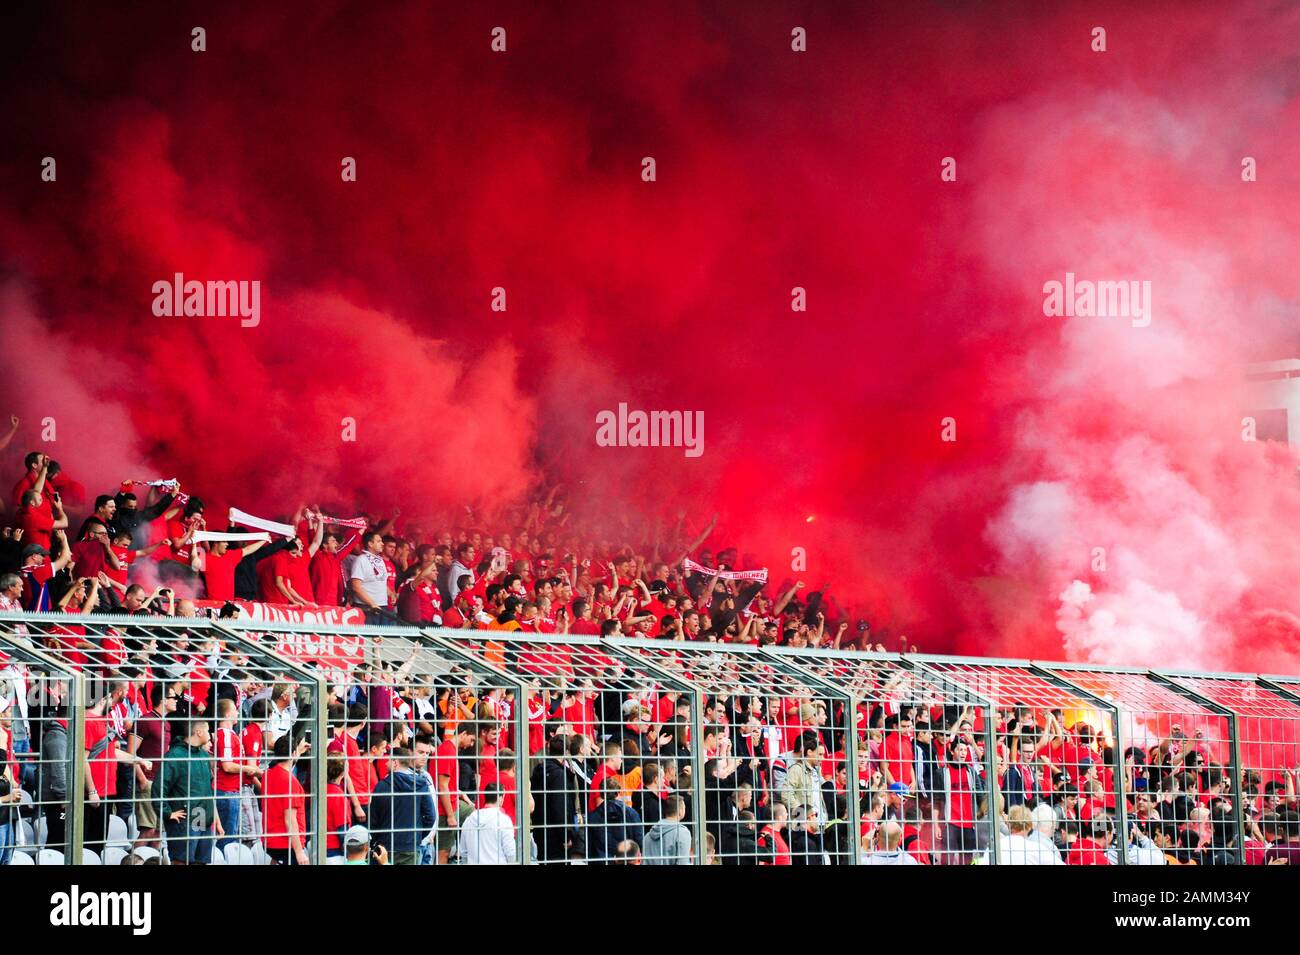 Derby in the southern regional football league: FC Bayern München II - TSV 1860 München II in the municipal stadium on Grünwalder Straße. The picture shows Bengalese fires in the block of the Bavarian fans on the counter tribune. [automated translation] Stock Photo